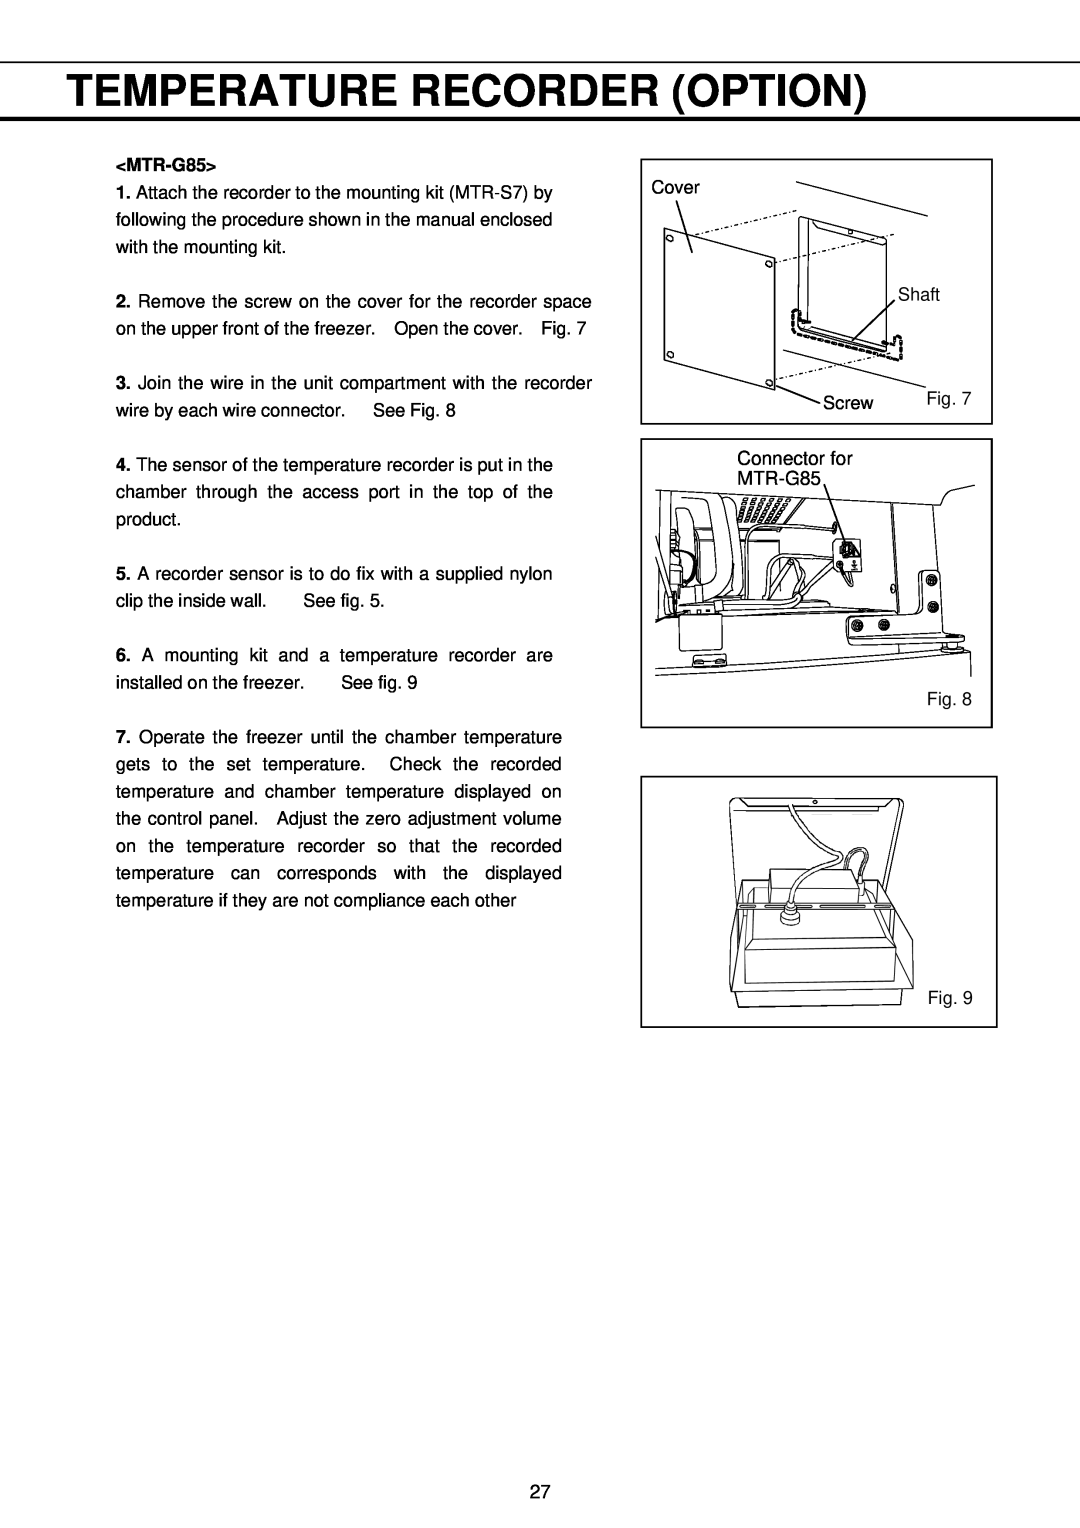 Sanyo MDF-U730M instruction manual Temperature Recorder Option, Connector for, MTR-G85 